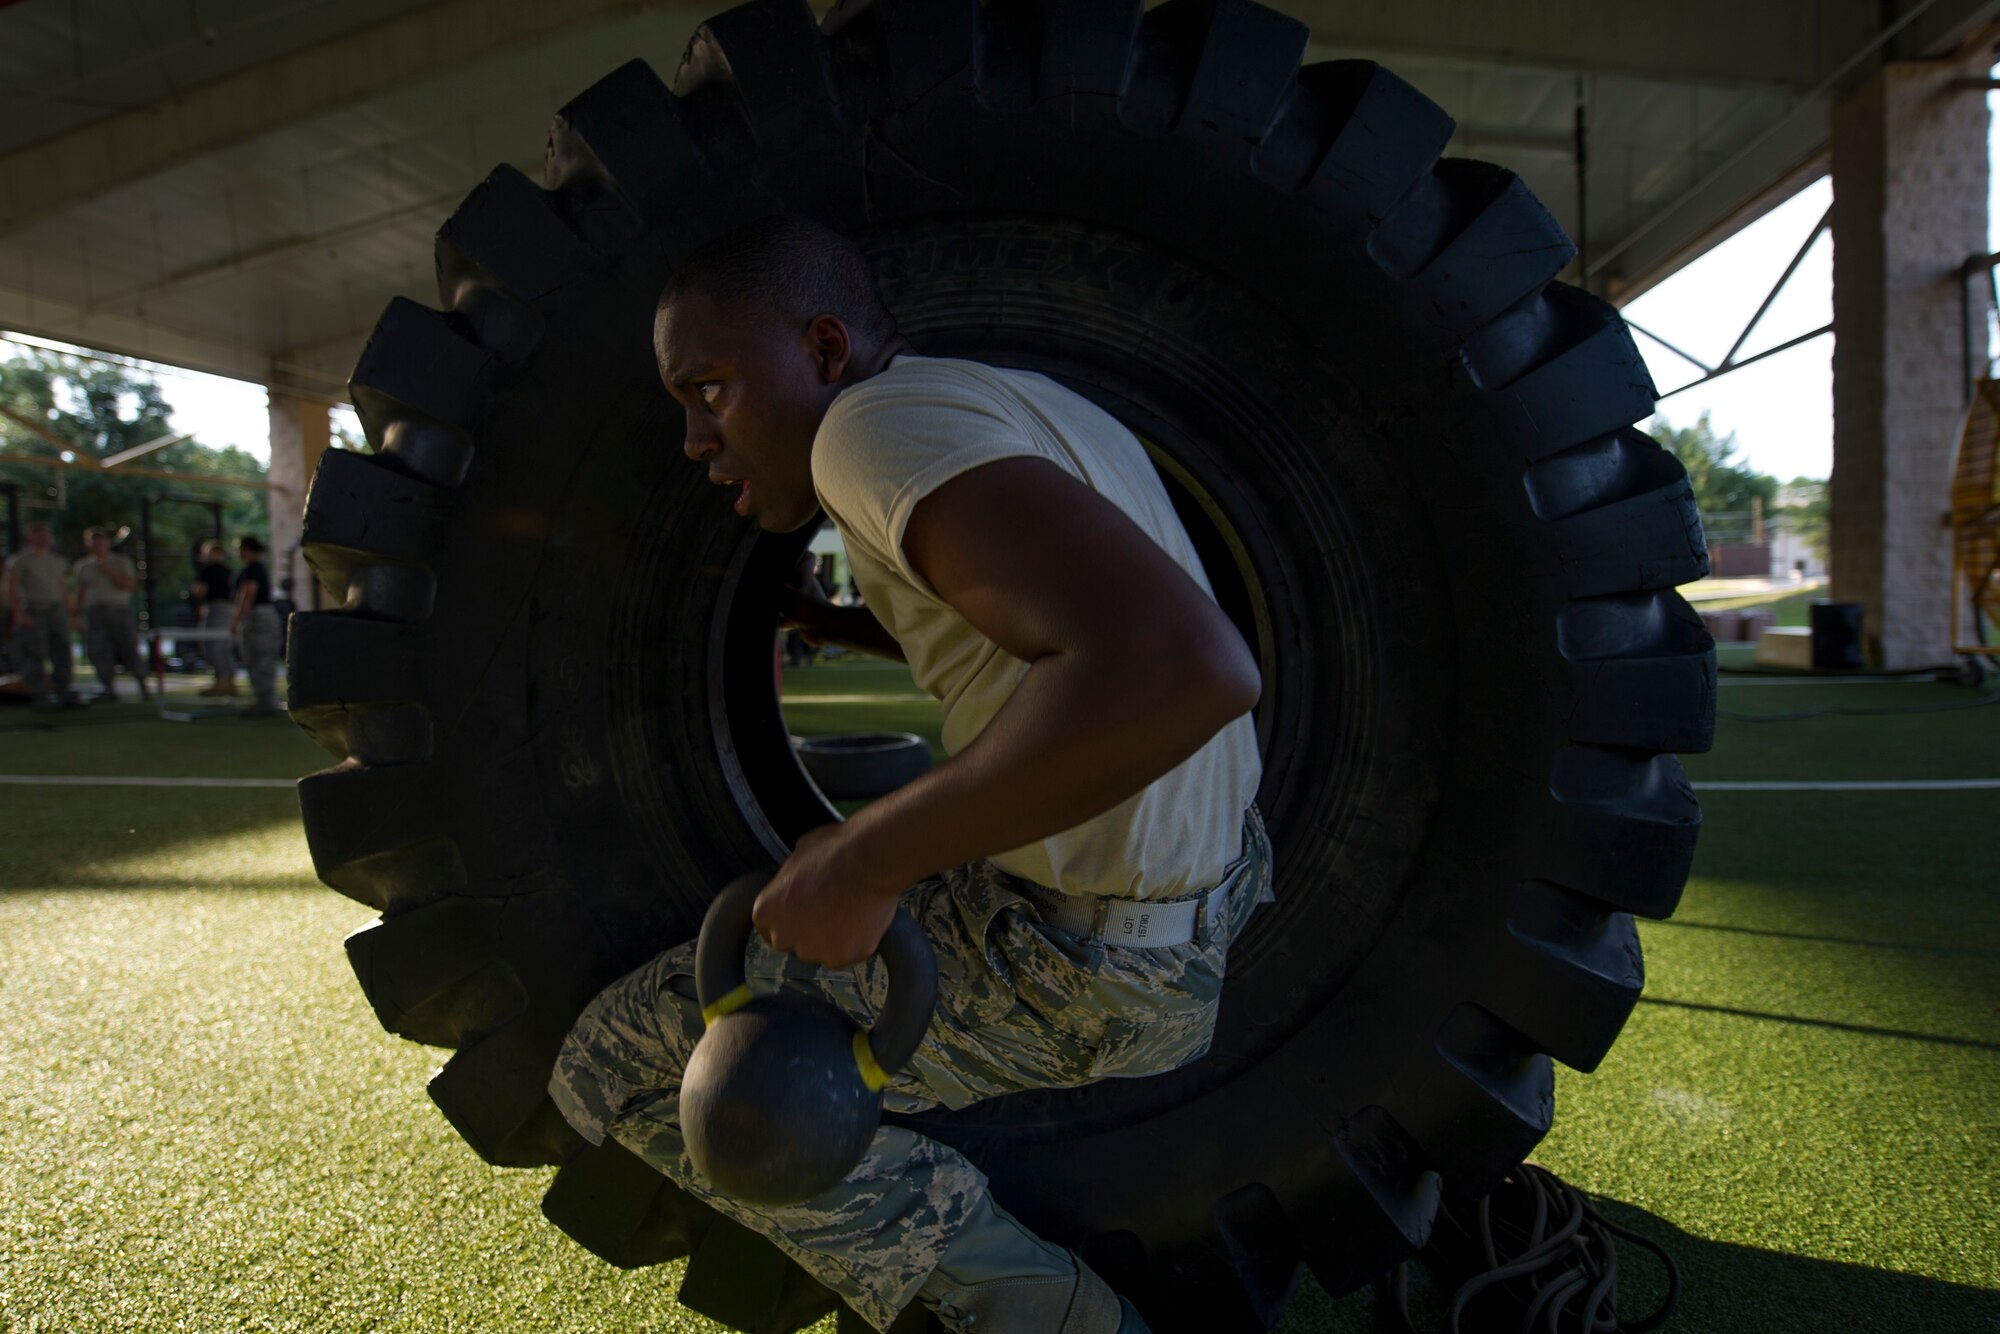 A Junior ROTC cadet climbs through a tire at the end of an obstacle course at the Special Tactics Training Squadron, Hurlburt Field, Fla., June 26, 2017. The JROTC Summer Leadership School program brought more than 50 cadets to Hurlburt Field to engage in a variety of team-building and leadership skill-developing exercise under the guidance of Air Commandos, June 26 – 30. (U.S. Air Force photo by Staff Sgt. Victor J. Caputo)